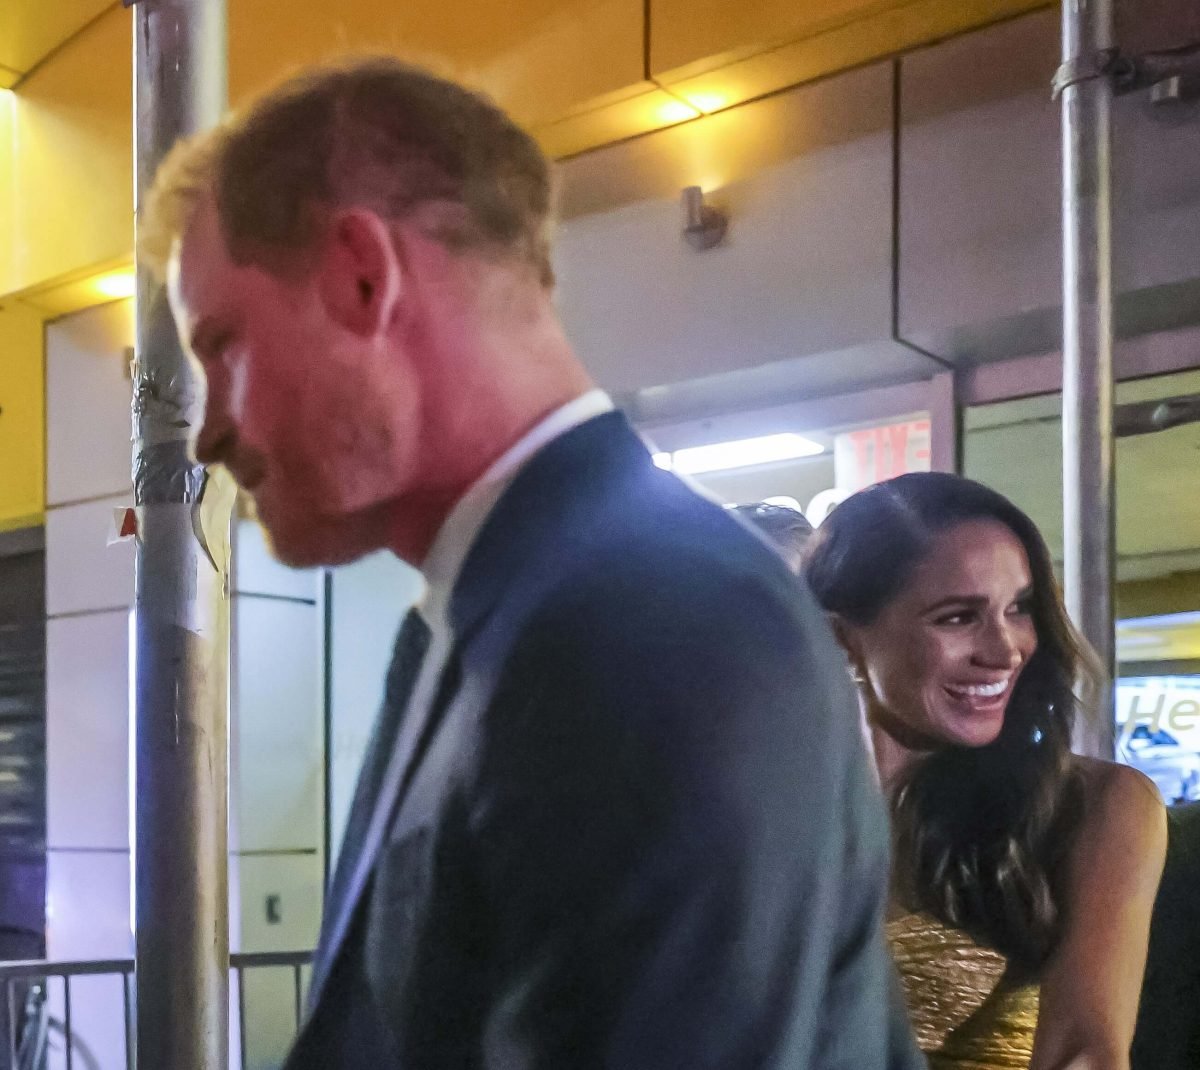 Prince Harry and Meghan Markle, who a body language expert says is more confident, dominant, and resilient, than her husband, attend Women of Vision Gala in New York City